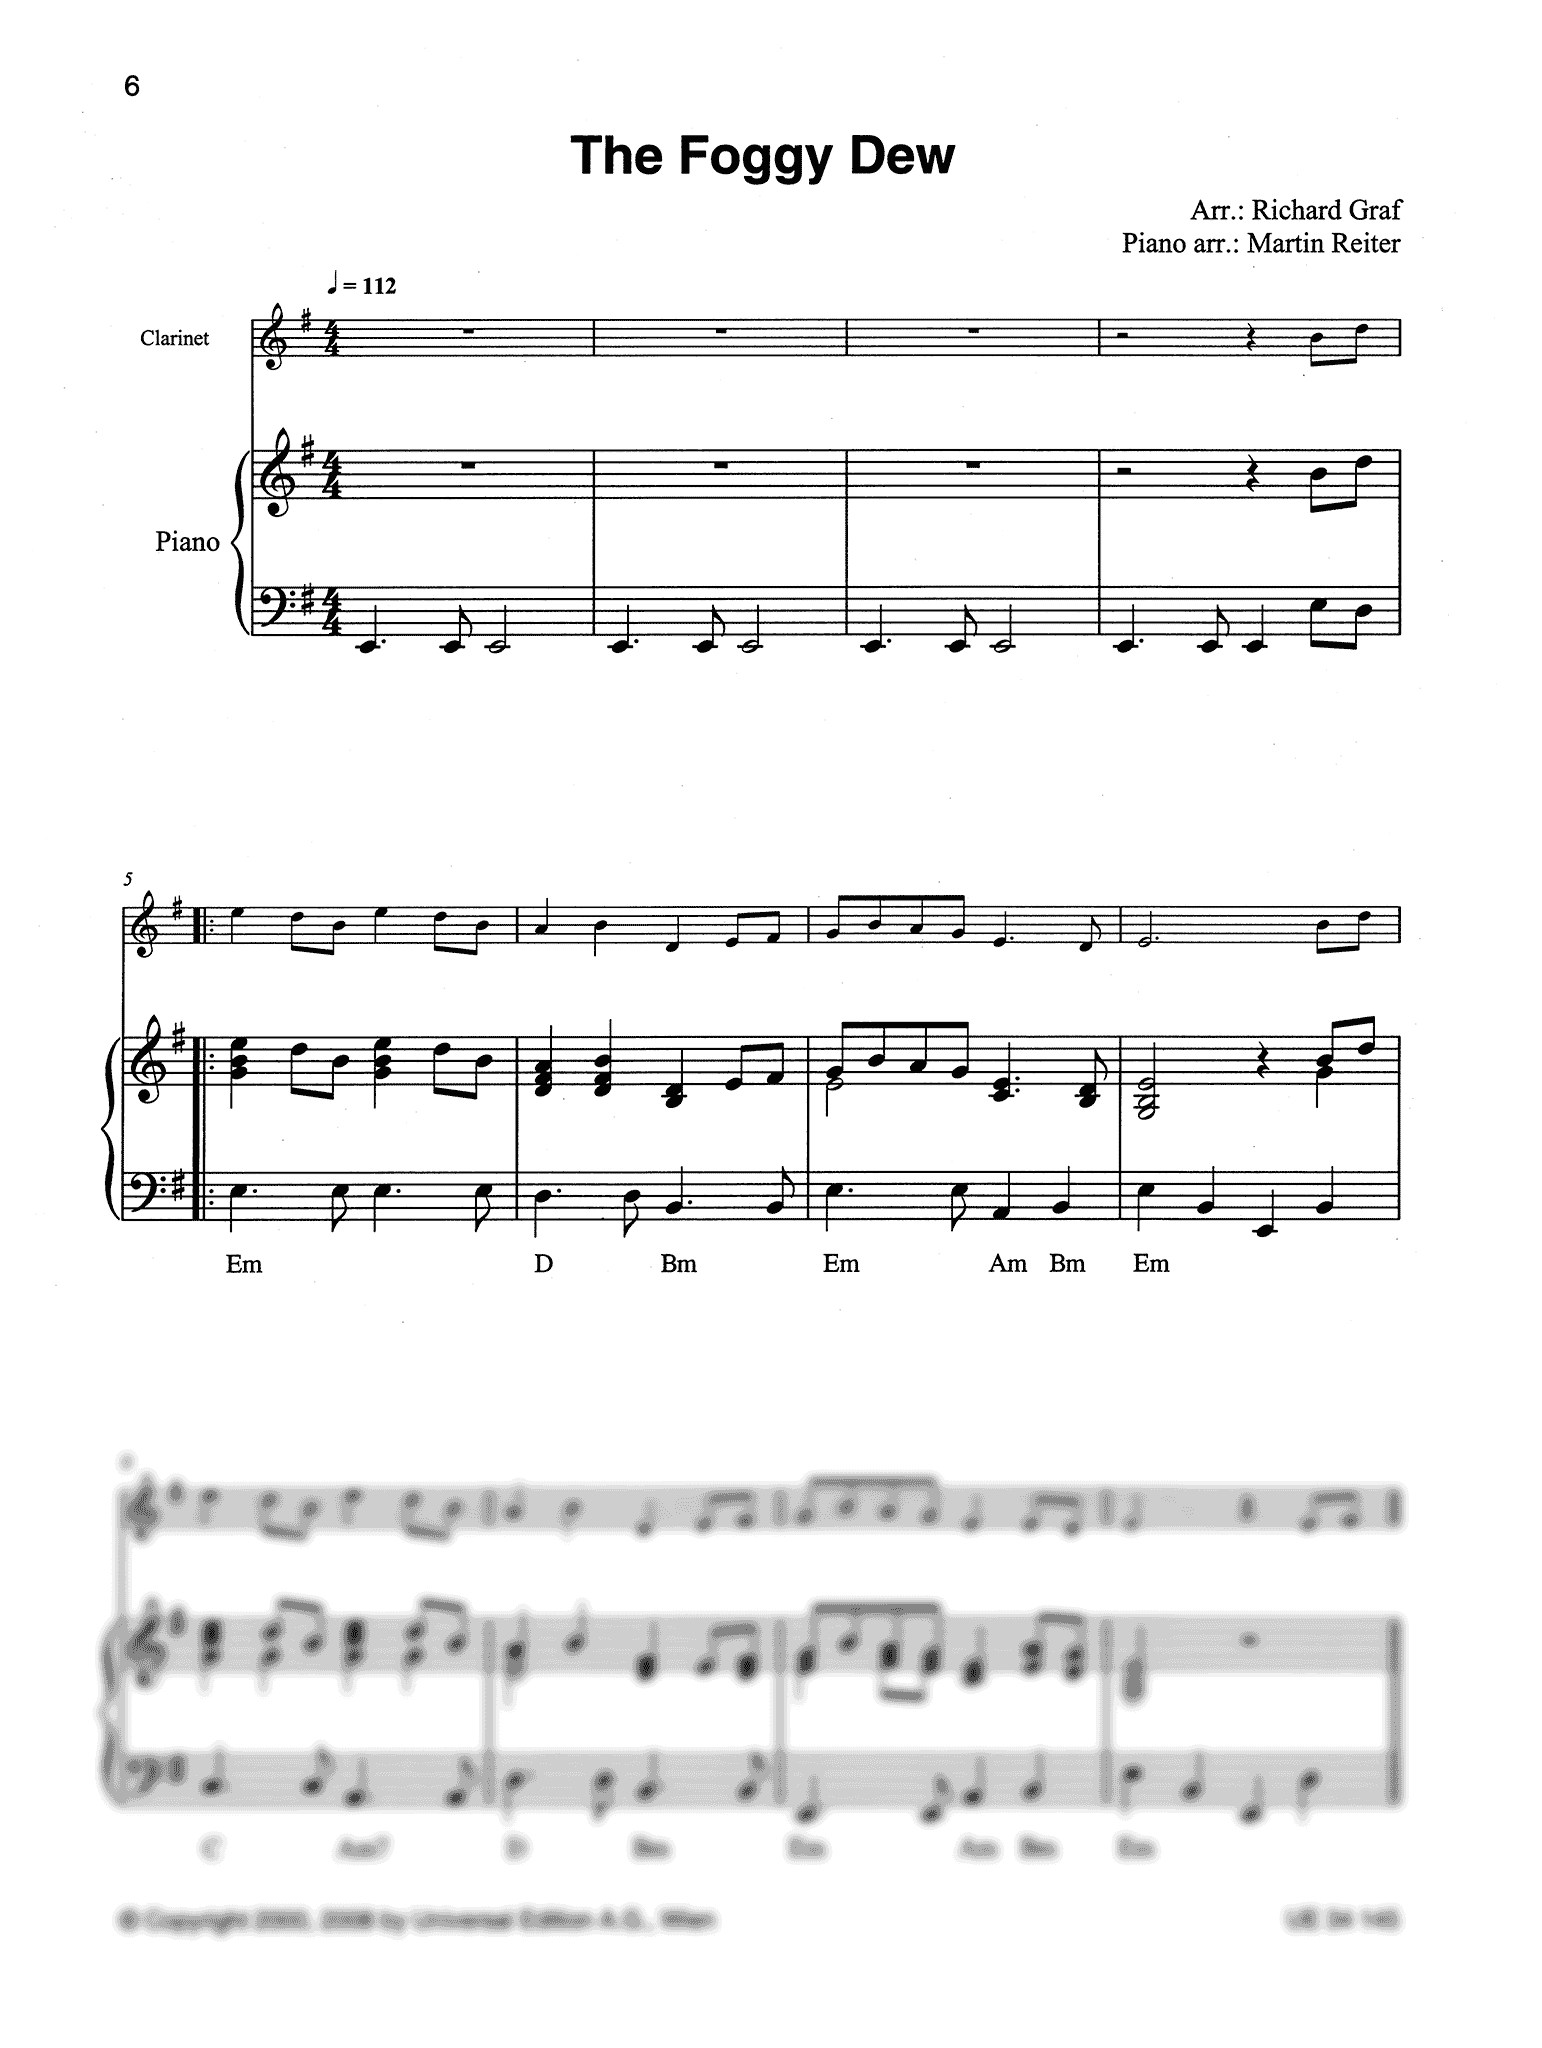 The Foggy Dew Clarinet and Piano score